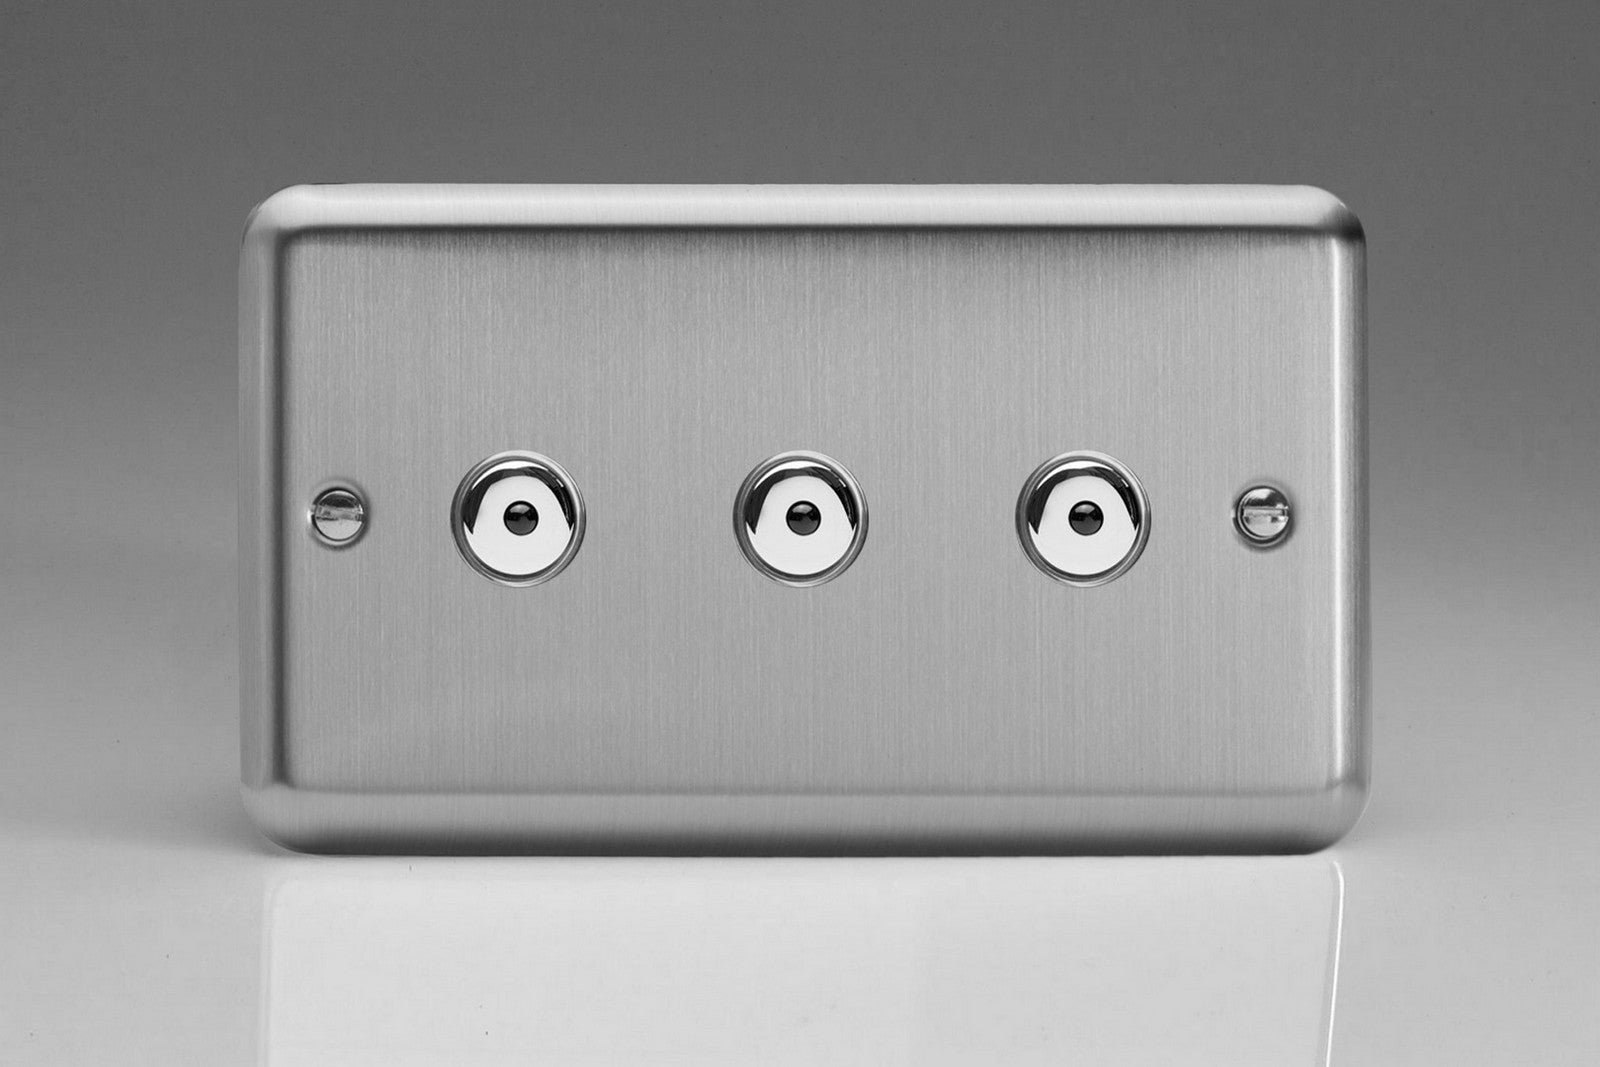 Varilight IJSI103 Value Matt Chrome 3-Gang 1-Way Remote/Touch Control Master LED Dimmer 3 x 0-100W (1-10 LEDs) (Twin Plate)